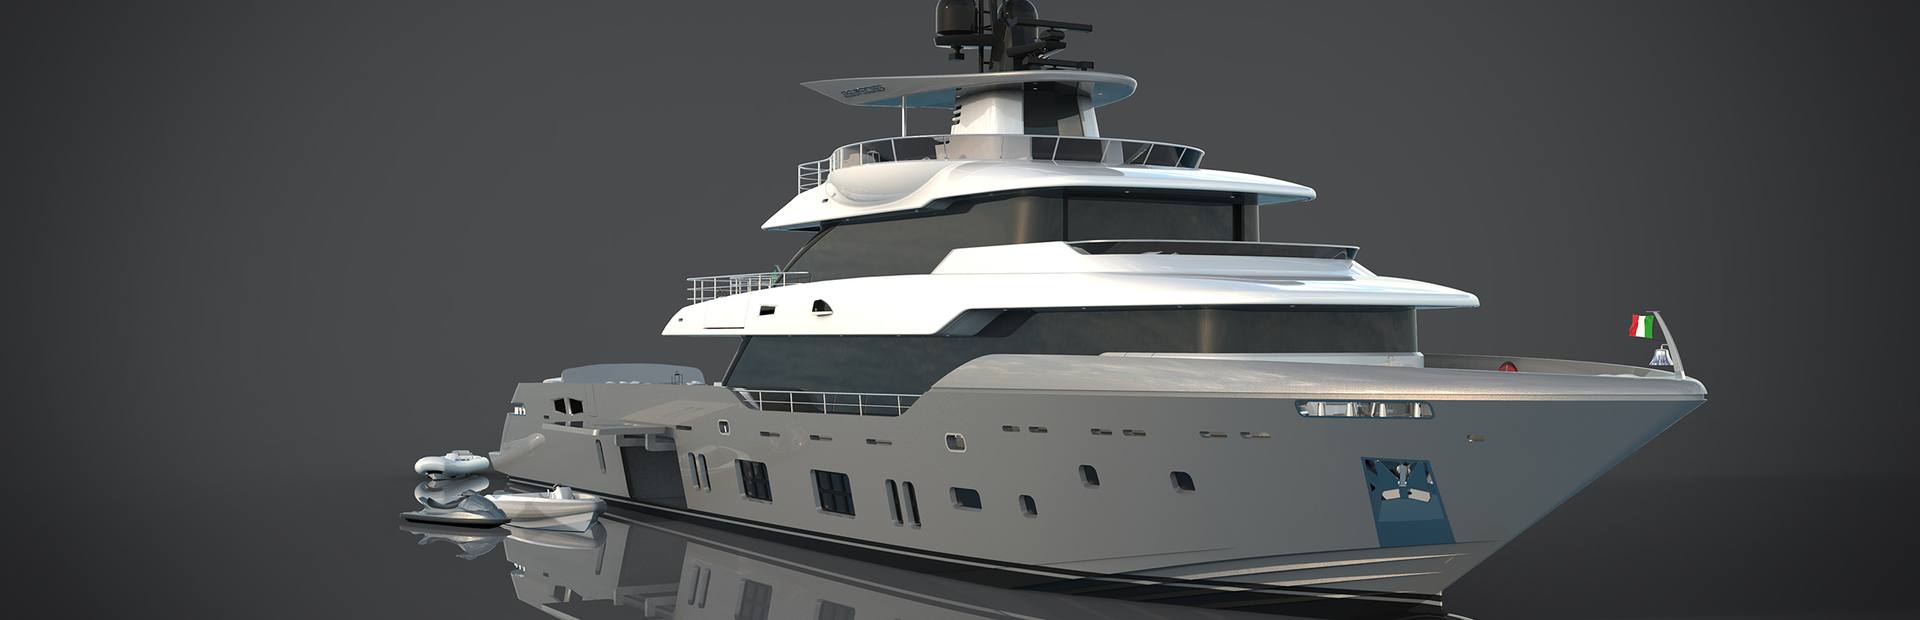 Oceanic 140 Fast Expedition Yacht